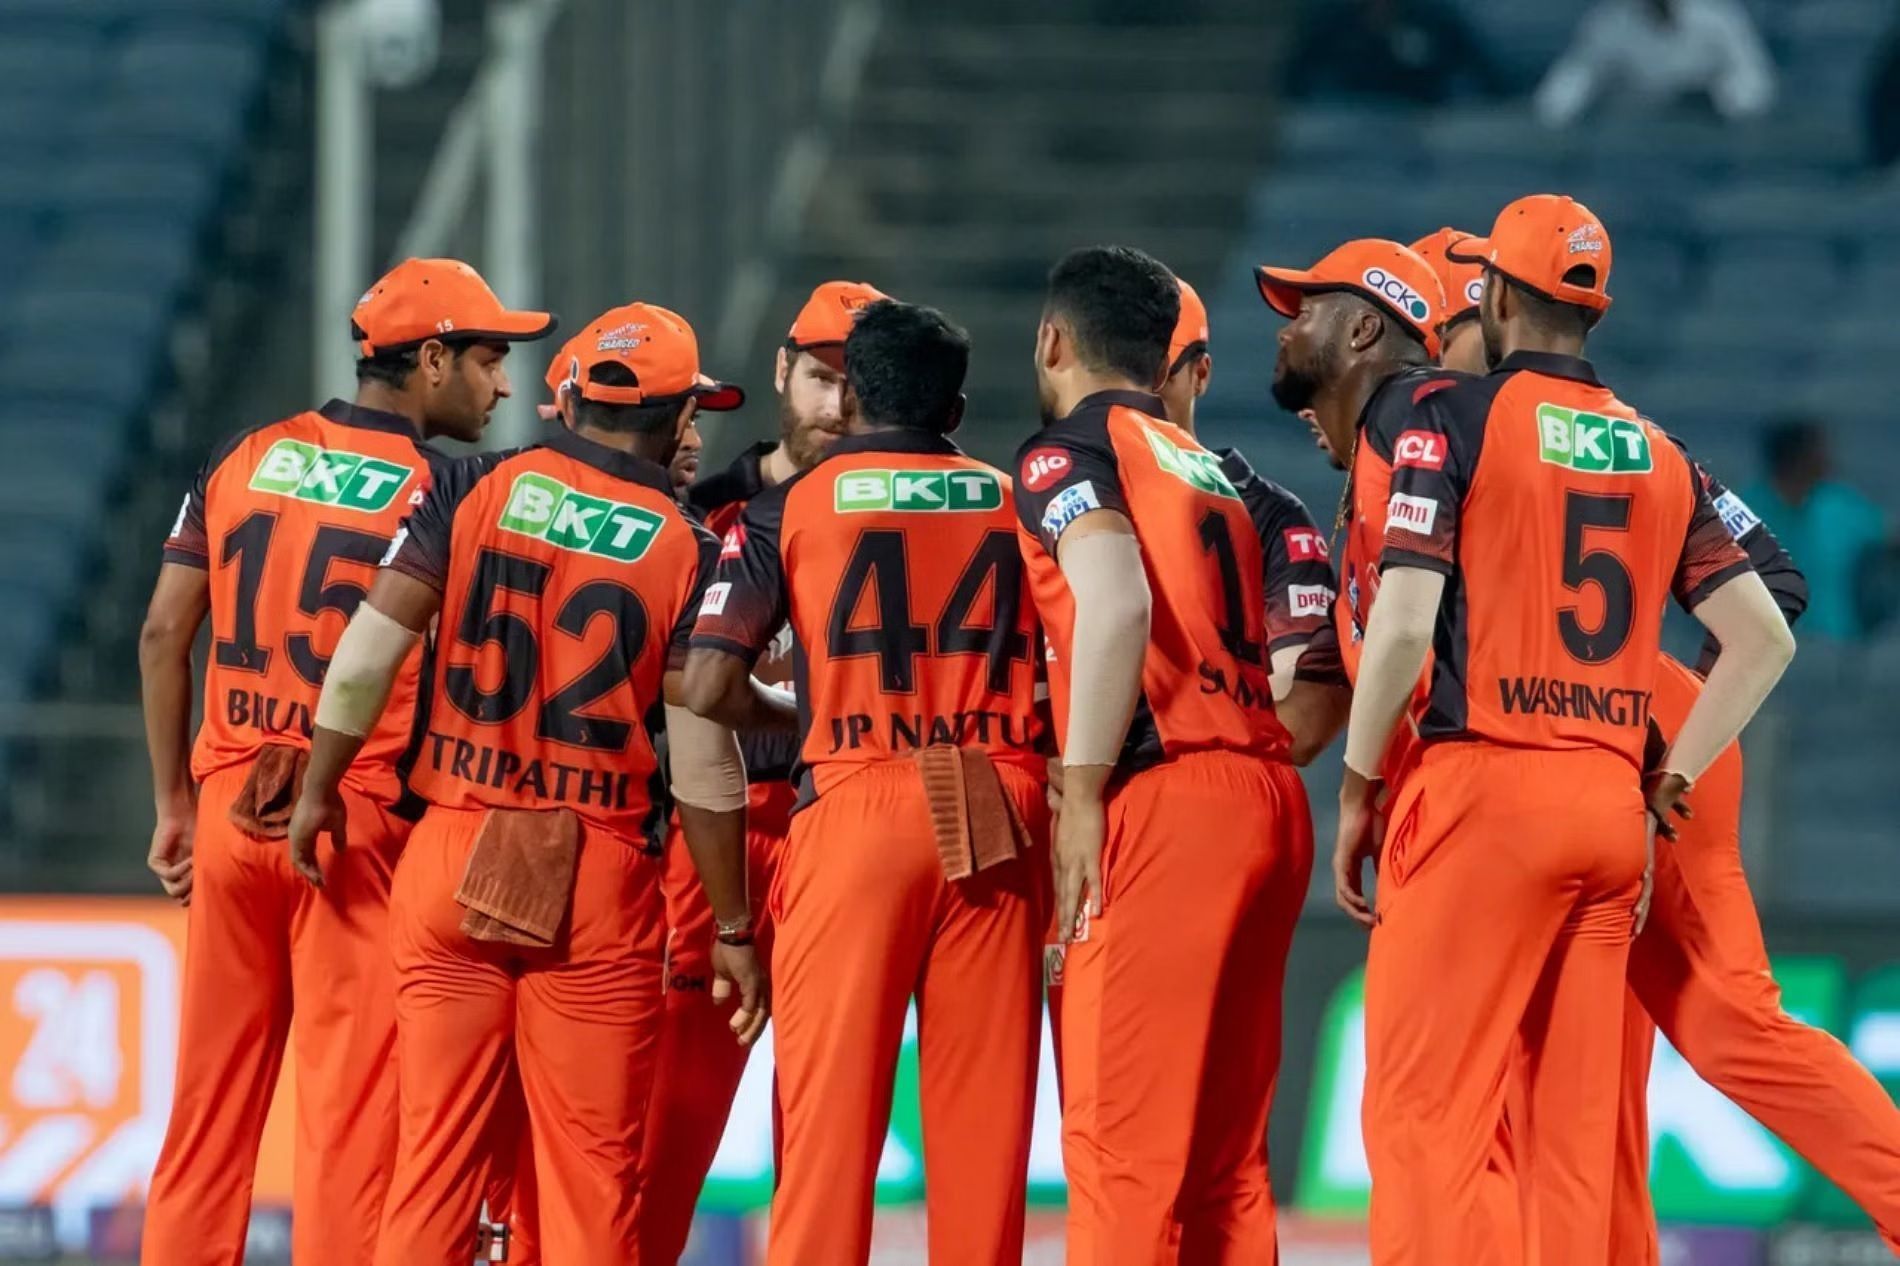 The SunRisers Hyderabad last qualified for the playoffs in IPL 2020. [P/C: iplt20.com]